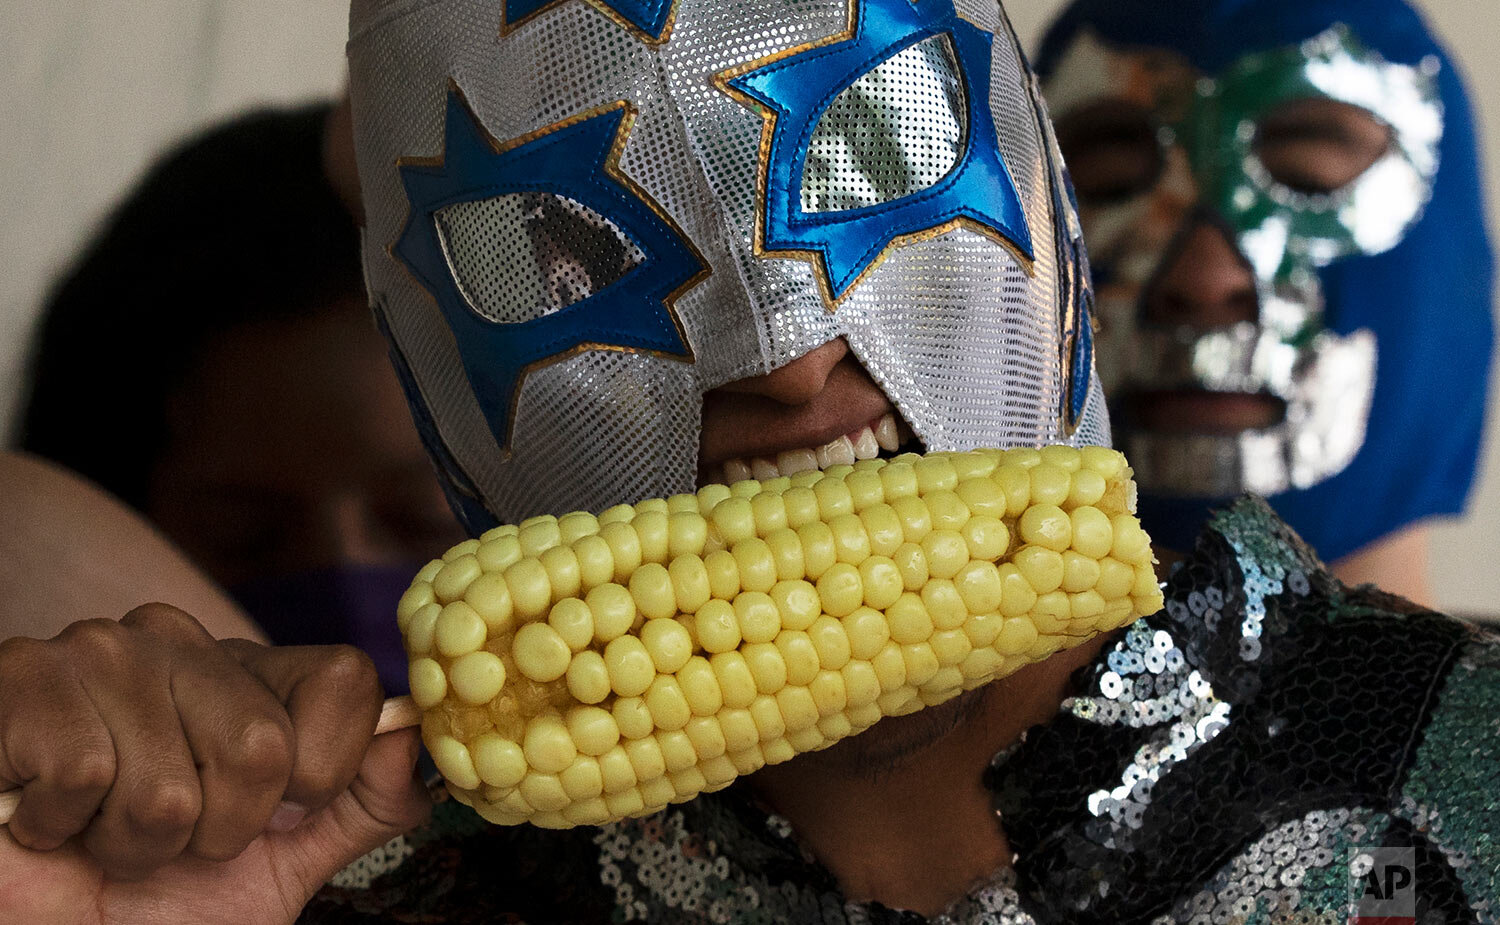  A Lucha Libre wrestler eats corn as he takes part in a health campaign promoting the use of masks amid the COVID-19 pandemic at the market in Xochimilco on the outskirts of Mexico City, Wednesday, Aug. 19, 2020. (AP Photo/Marco Ugarte) 